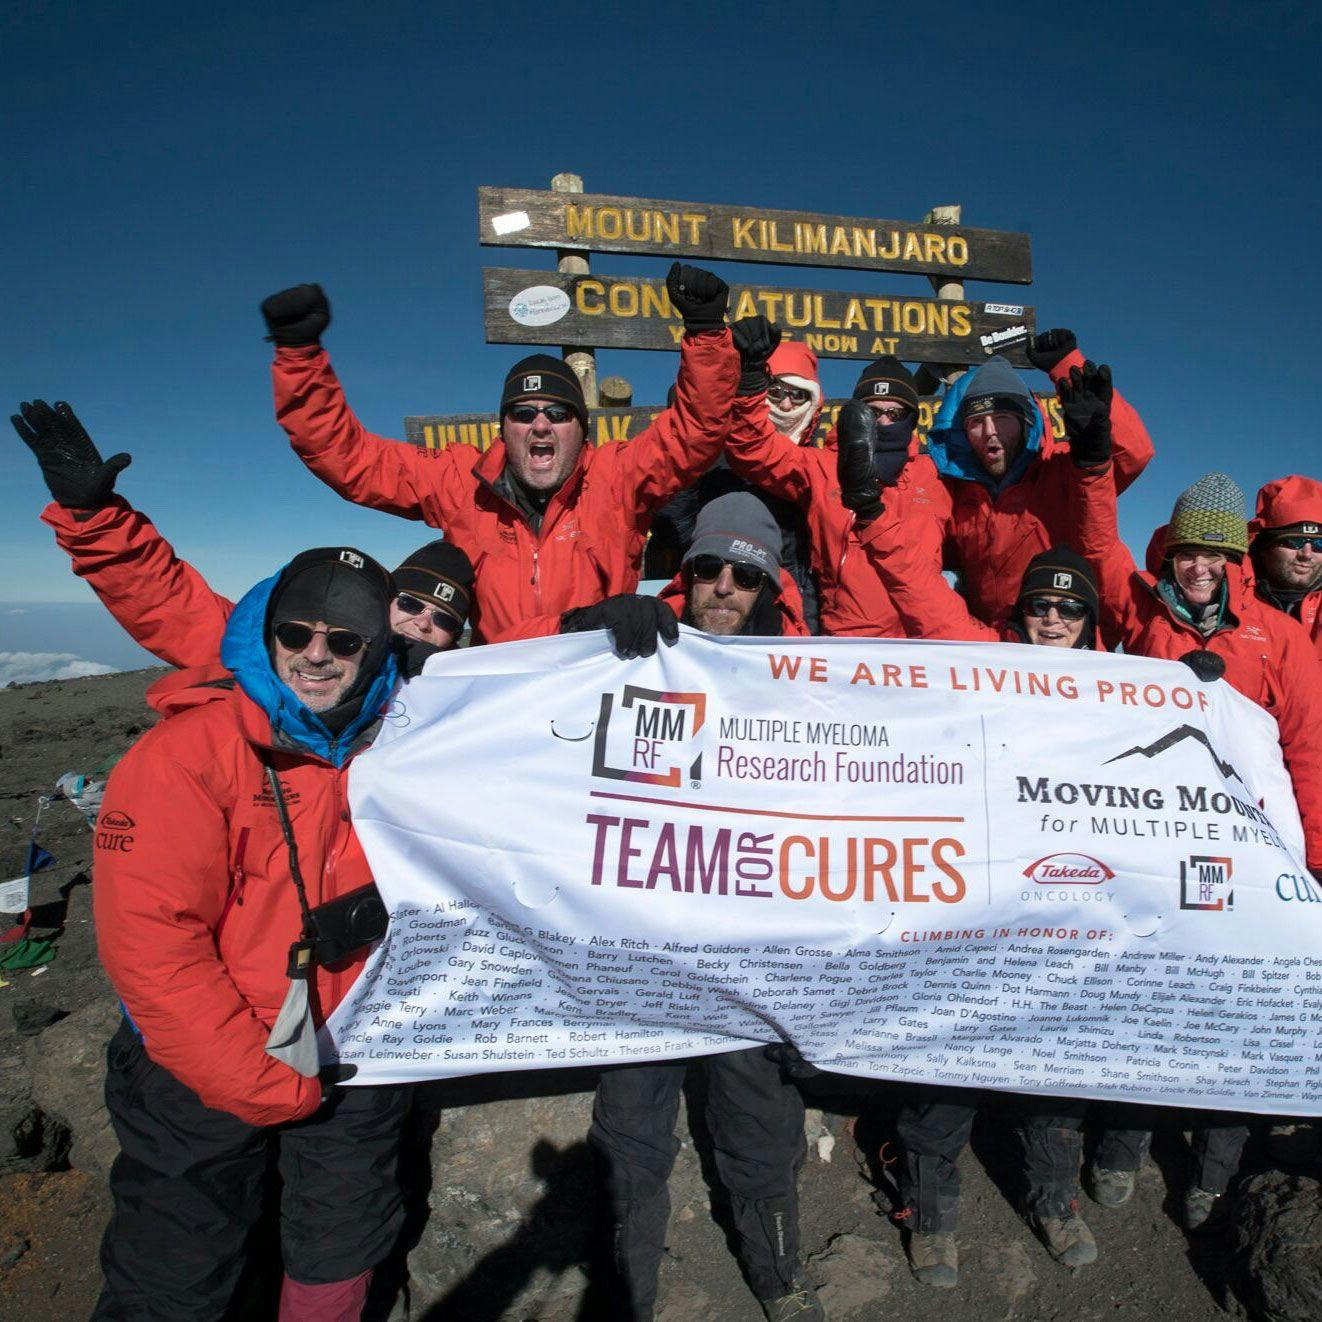 Climbing Kilimanjaro for Multiple Myeloma Research Inspired More Than Just Donations